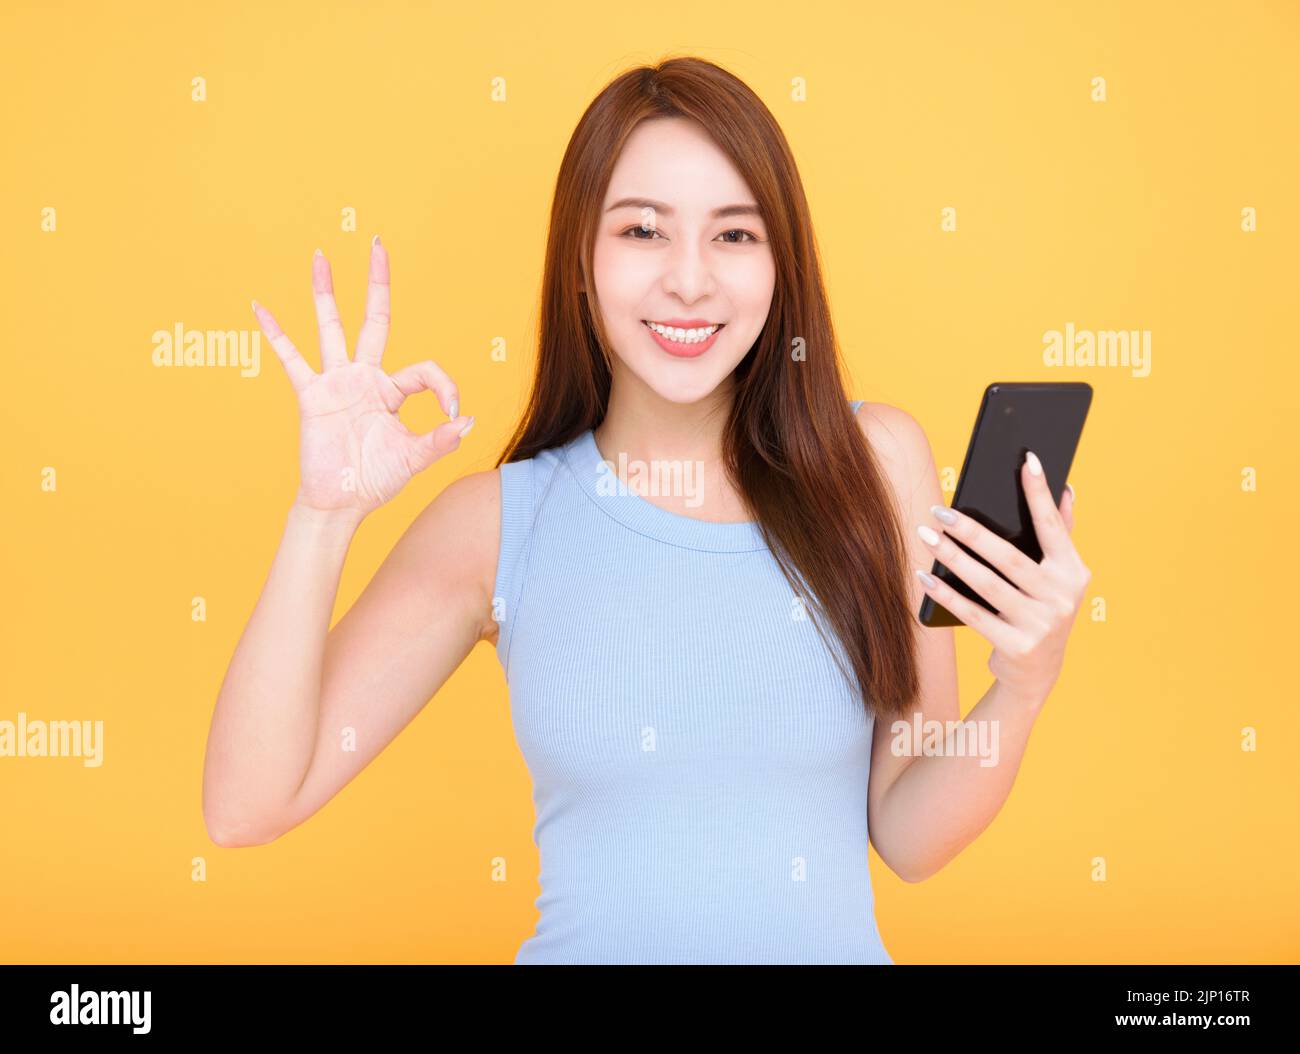 Smiling asian woman holding mobile phone on yellow background and showing ok sign Stock Photo